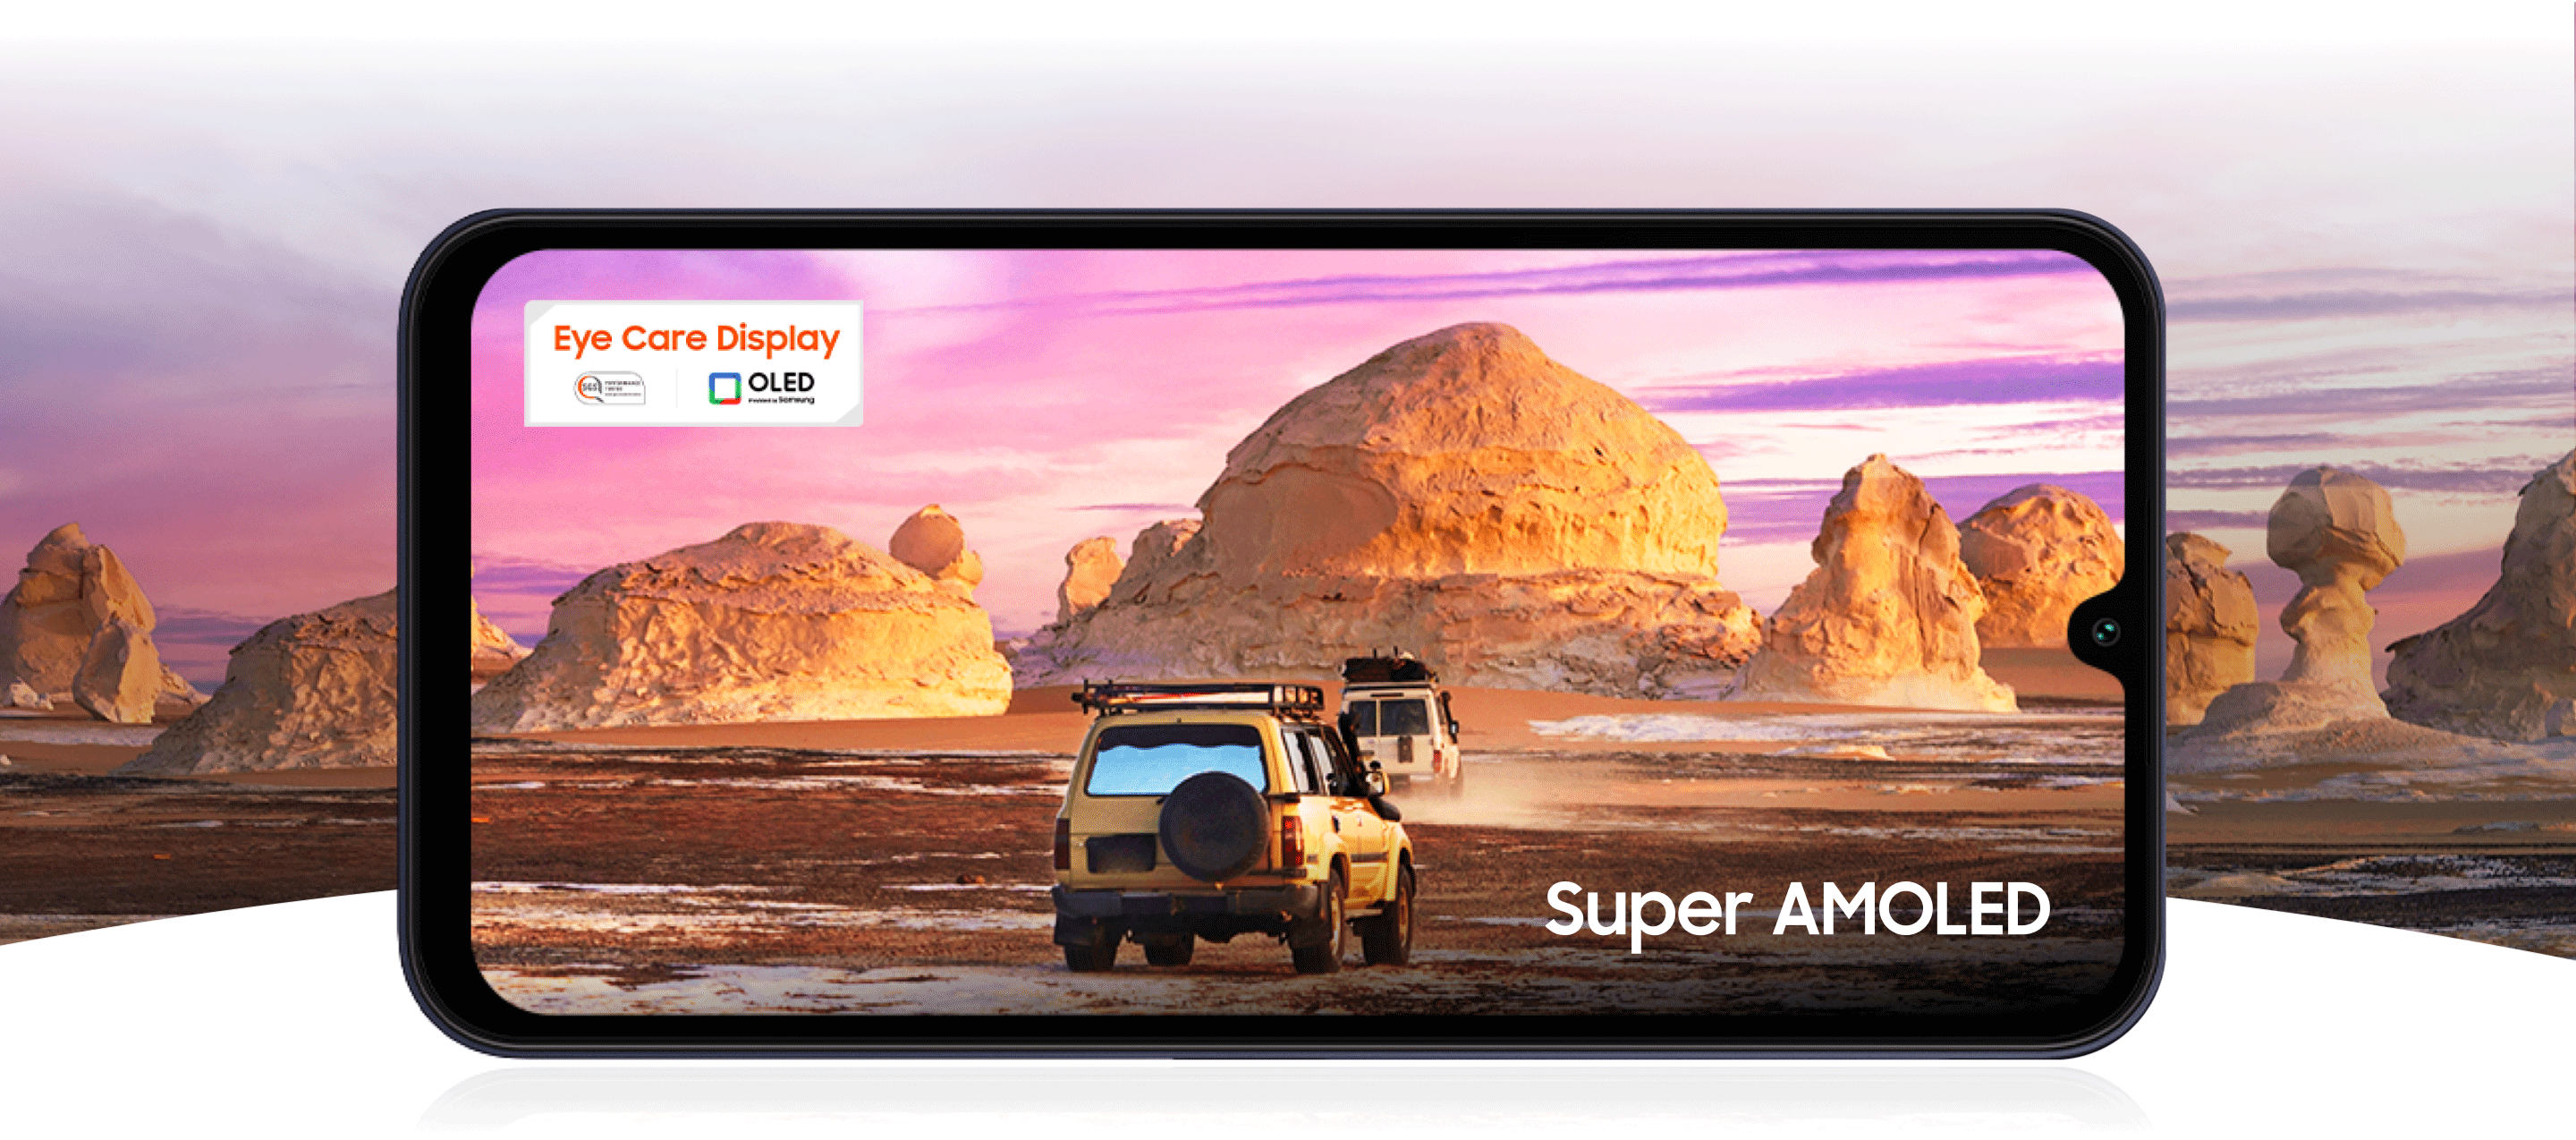 Super AMOLED display with a background of a jeep in rocky mountains